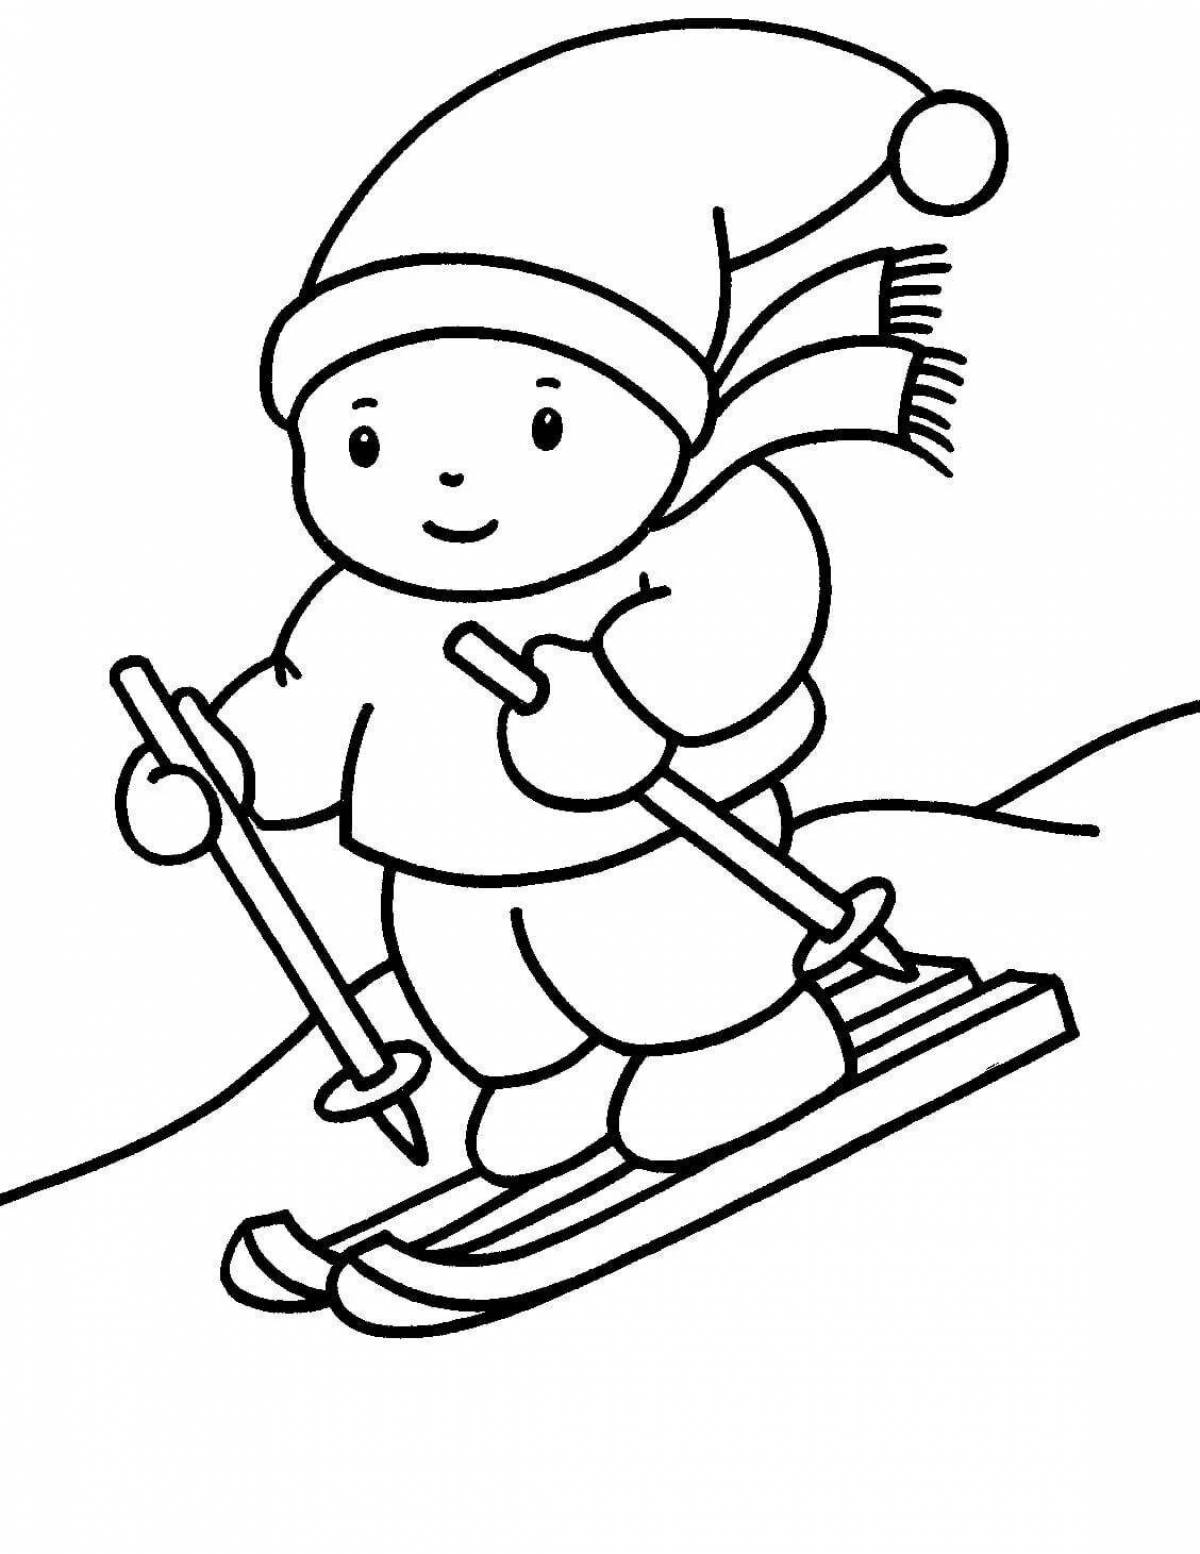 Fun coloring book skier for children 5-6 years old